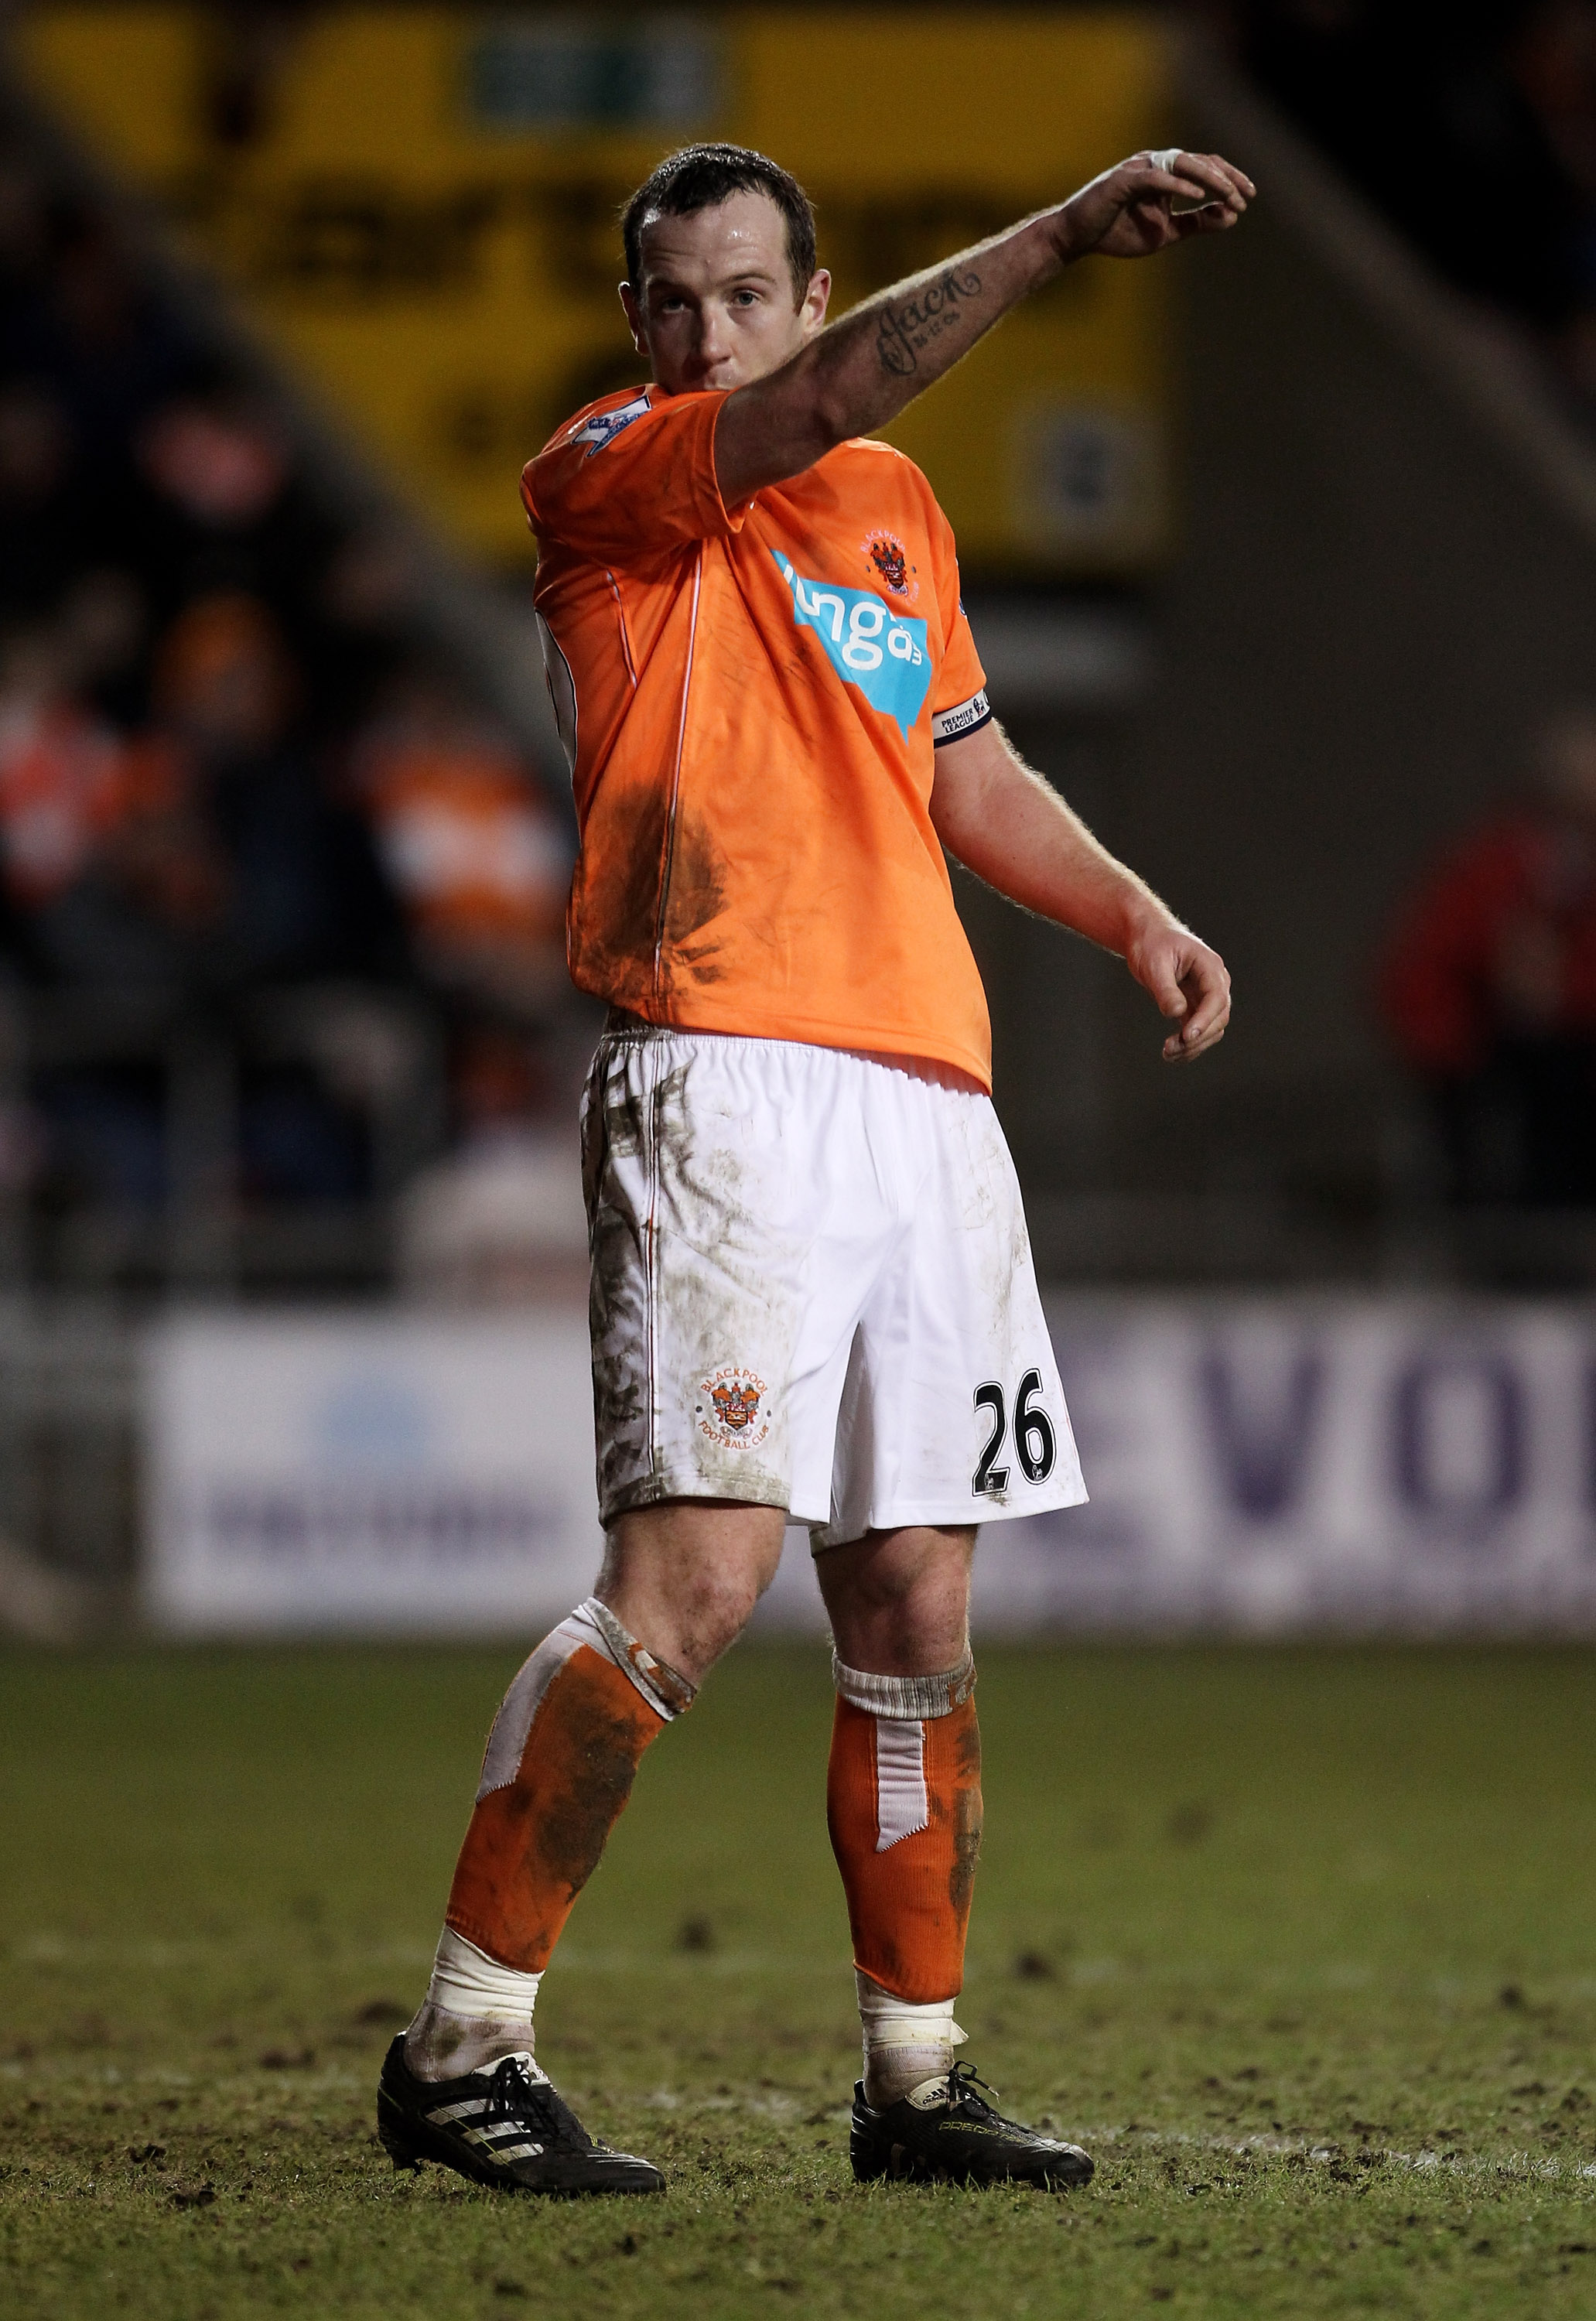 BLACKPOOL, ENGLAND - JANUARY 25:  Charlie Adam of Blackpool looks dejected during the Barclays Premier League match between Blackpool and Manchester United at Bloomfield Road on January 25, 2011 in Blackpool, England.  (Photo by Alex Livesey/Getty Images)